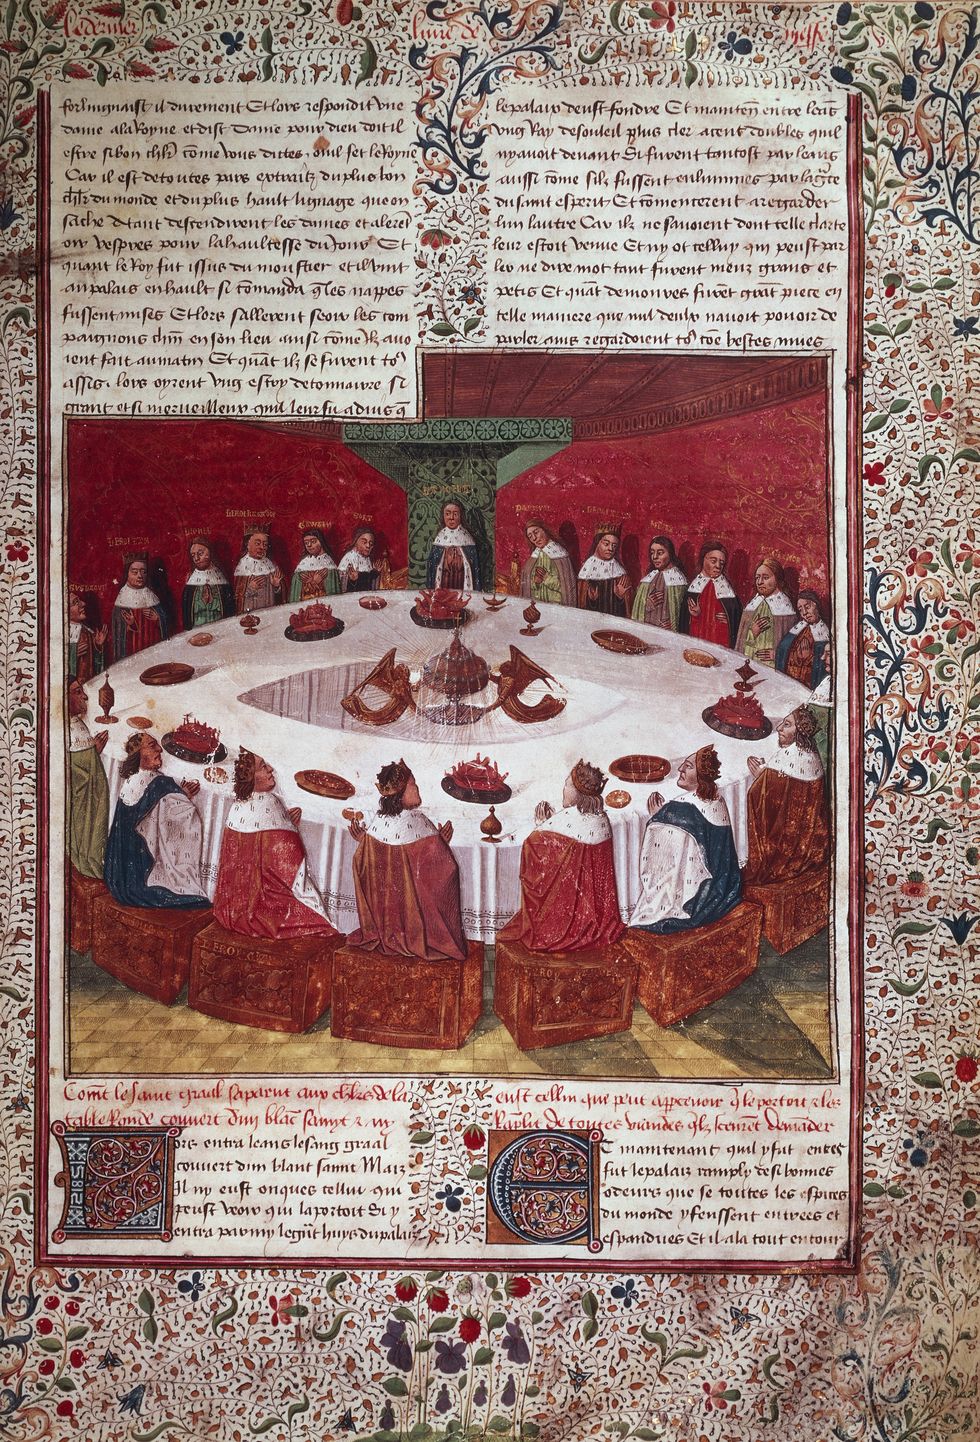 A vision of the Grail, Arthur and the Knights of the Round Table